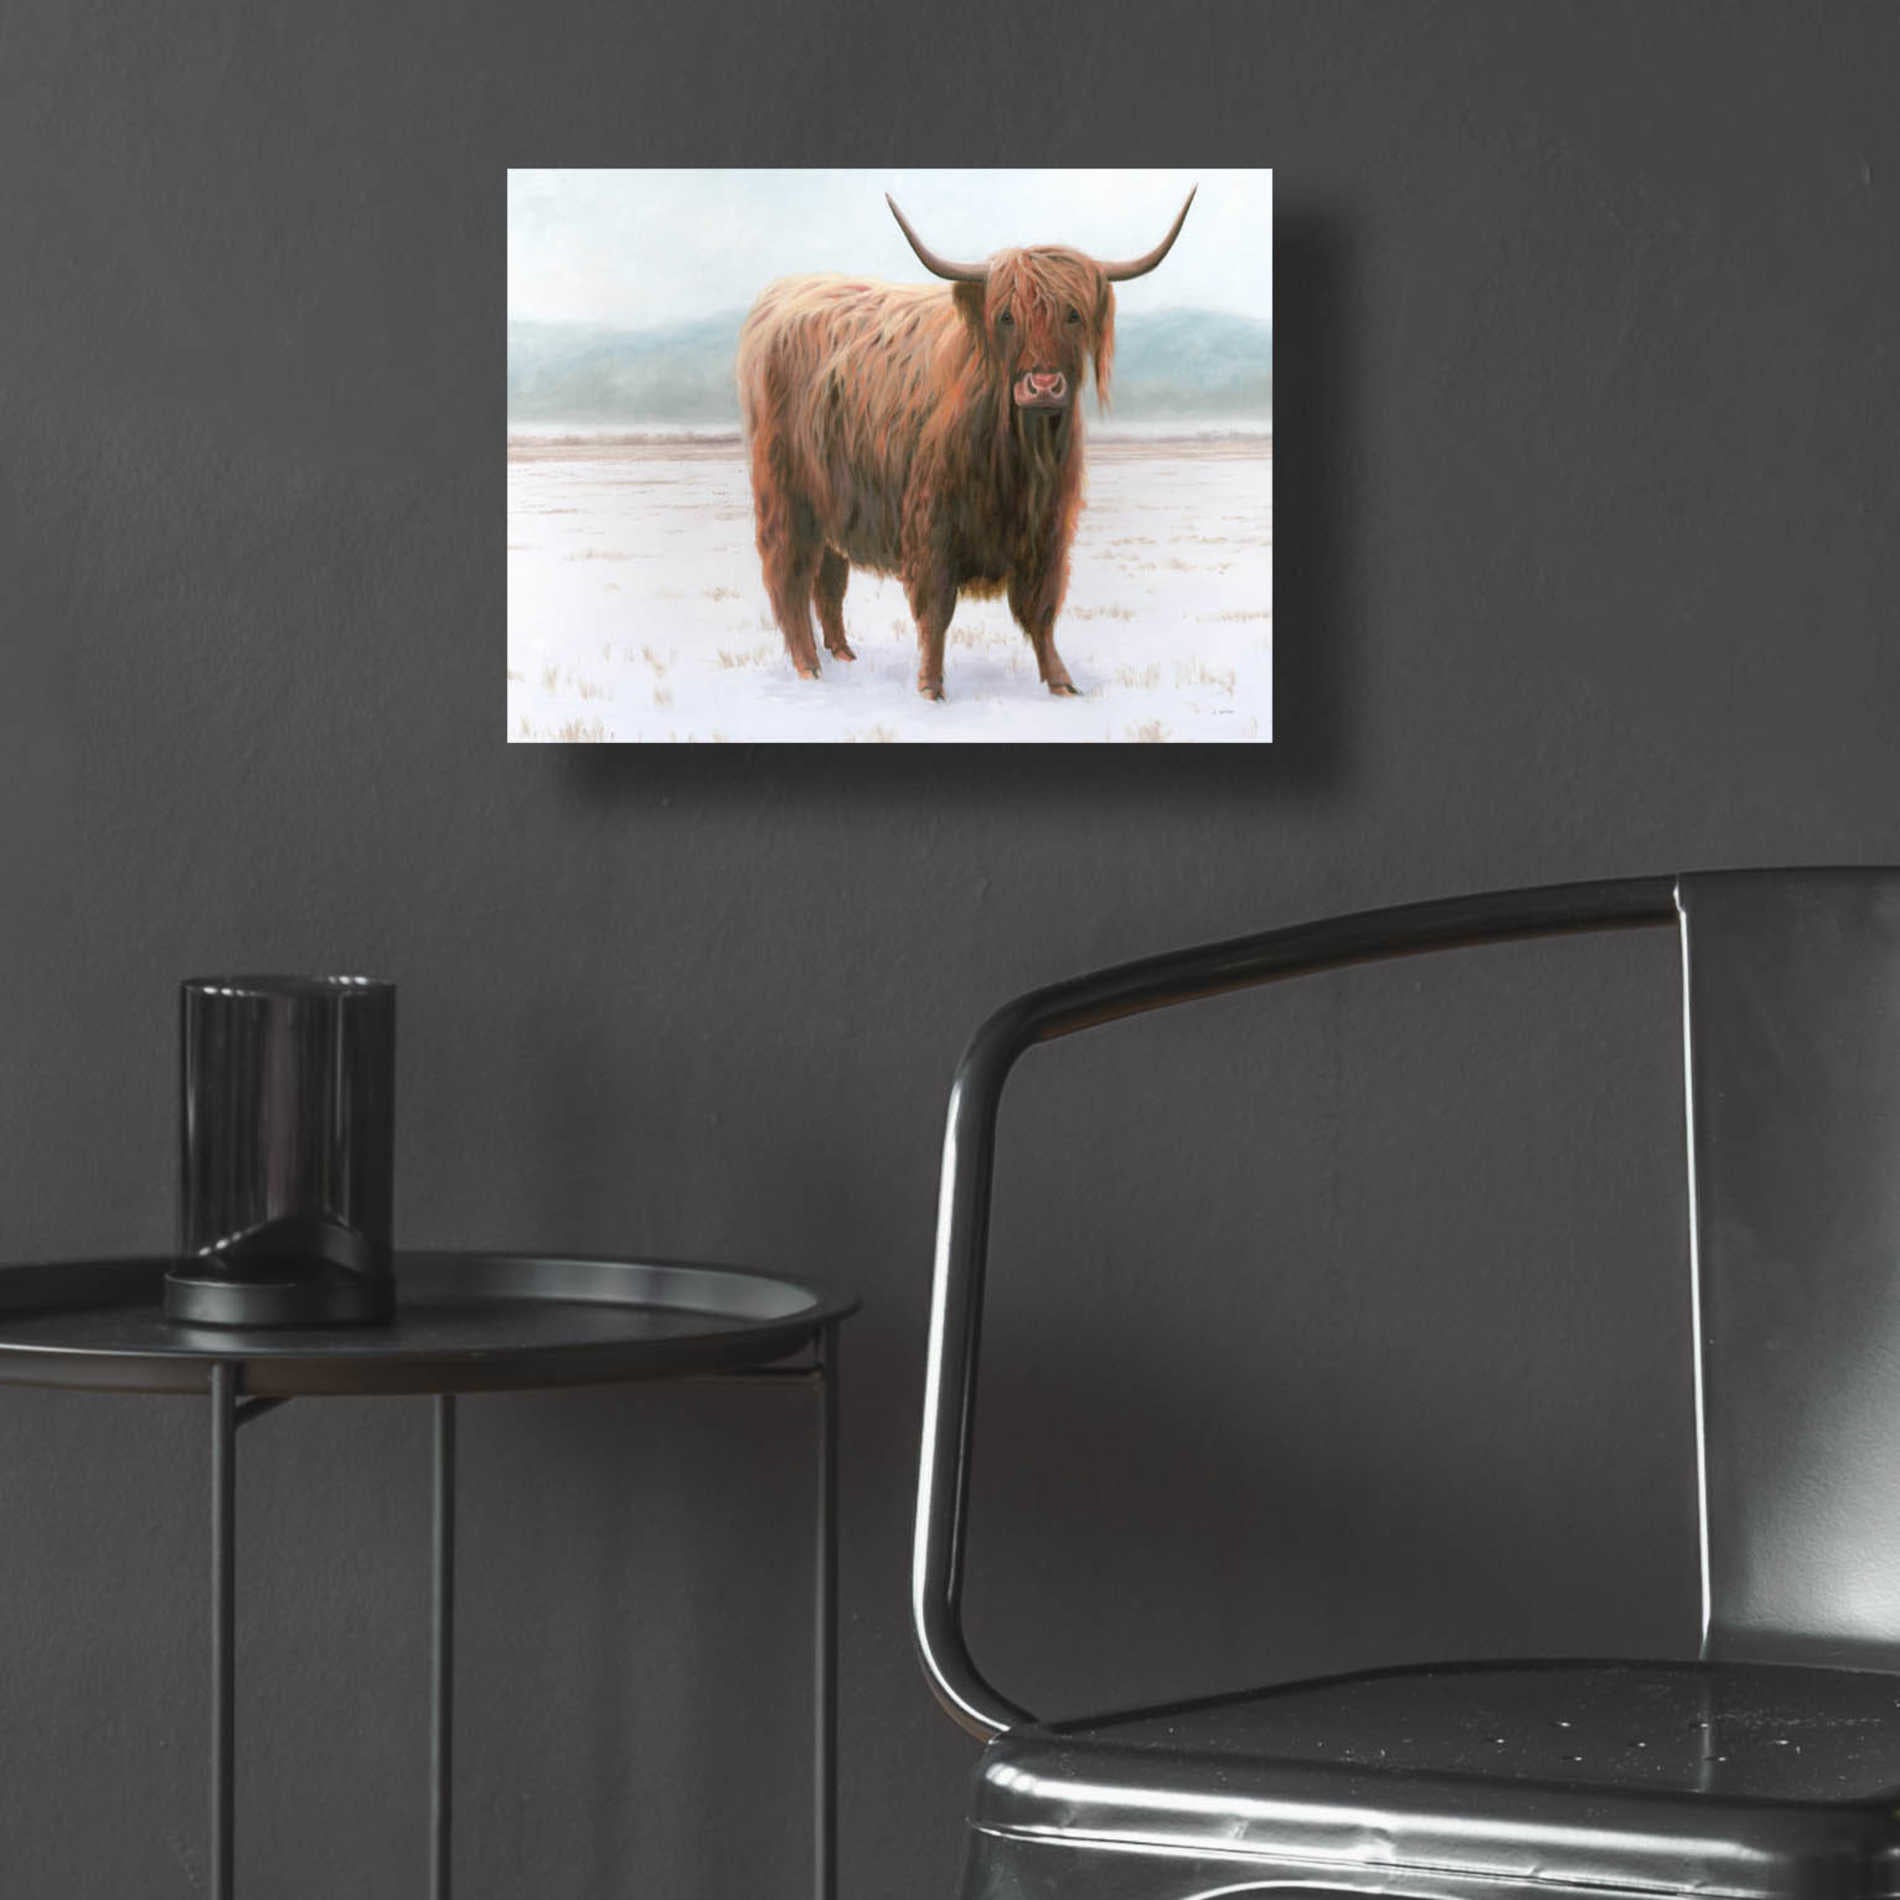 Epic Art 'King of the Highland Fields' by James Wiens, Acrylic Glass Wall Art,16x12